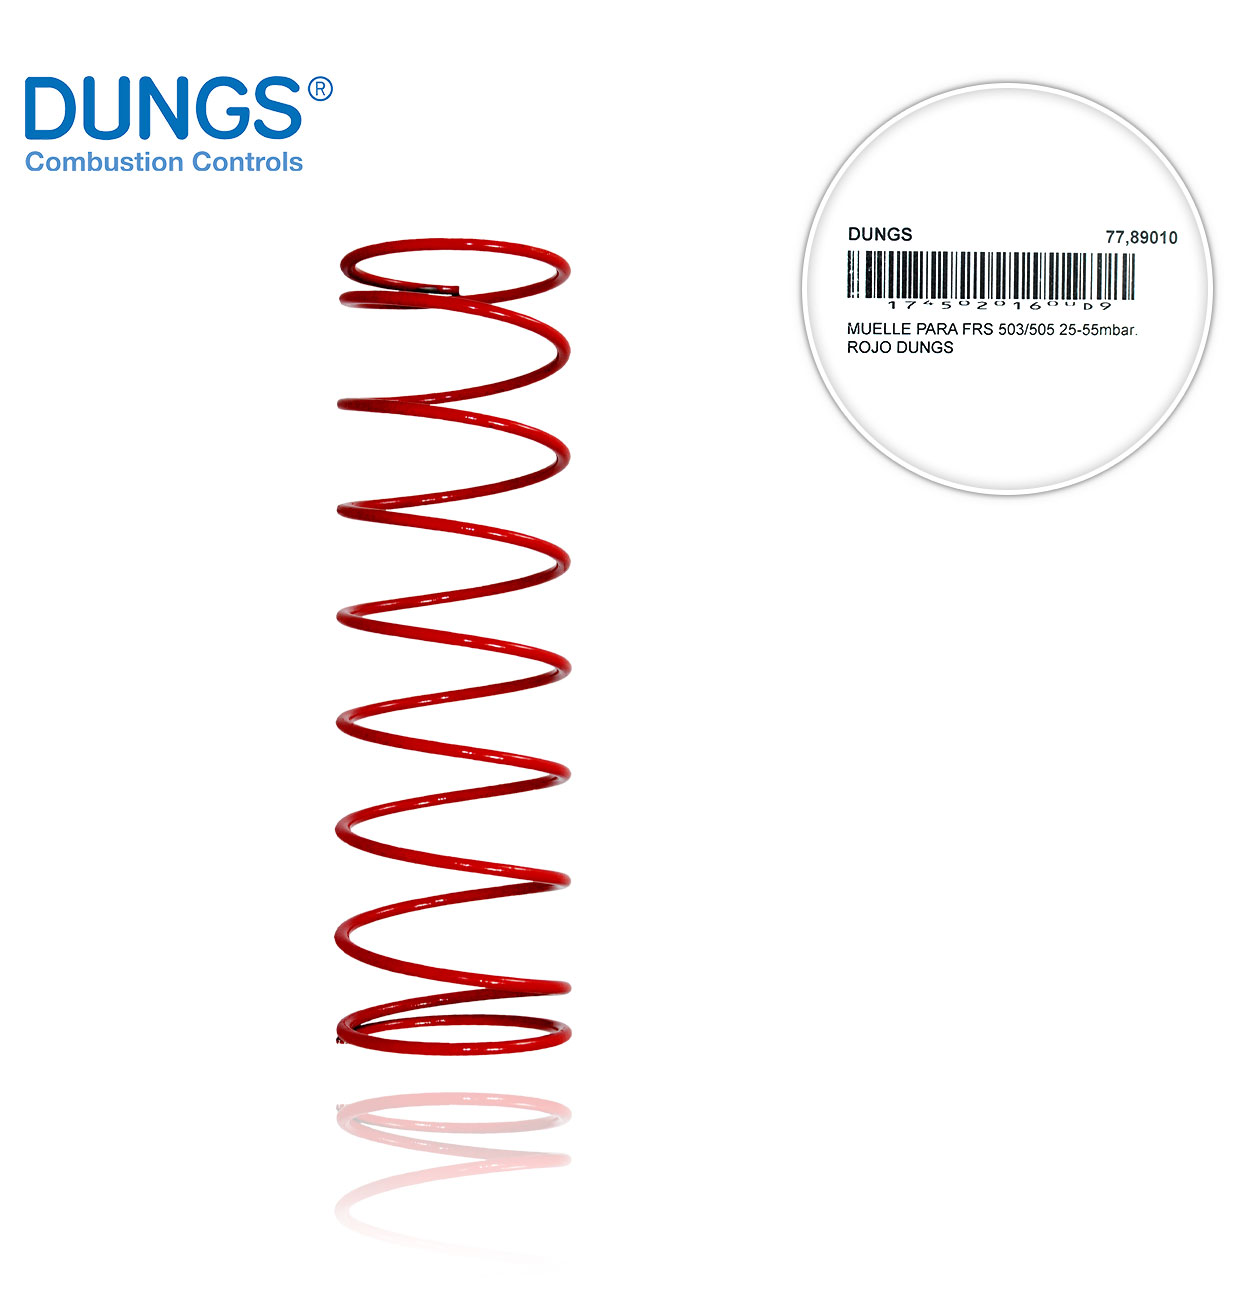 MUELLE ROJO 25-55mbar. FRS 503/505 DUNGS 229822